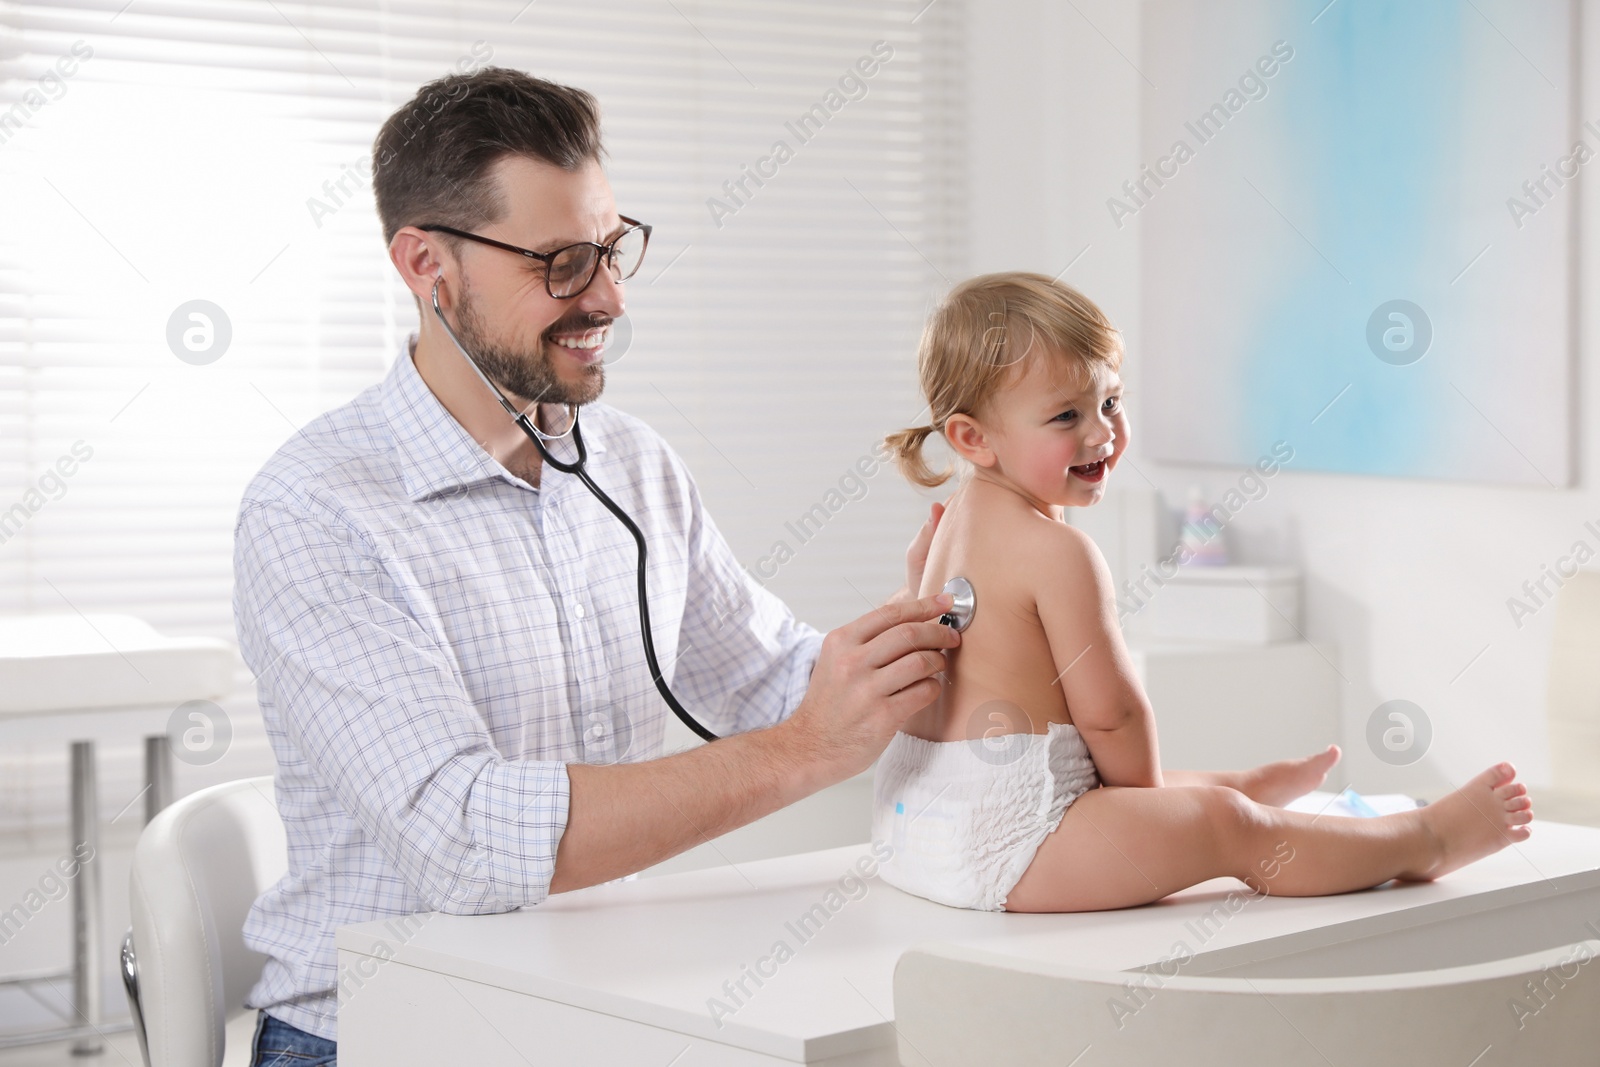 Photo of Pediatrician examining baby with stethoscope in clinic